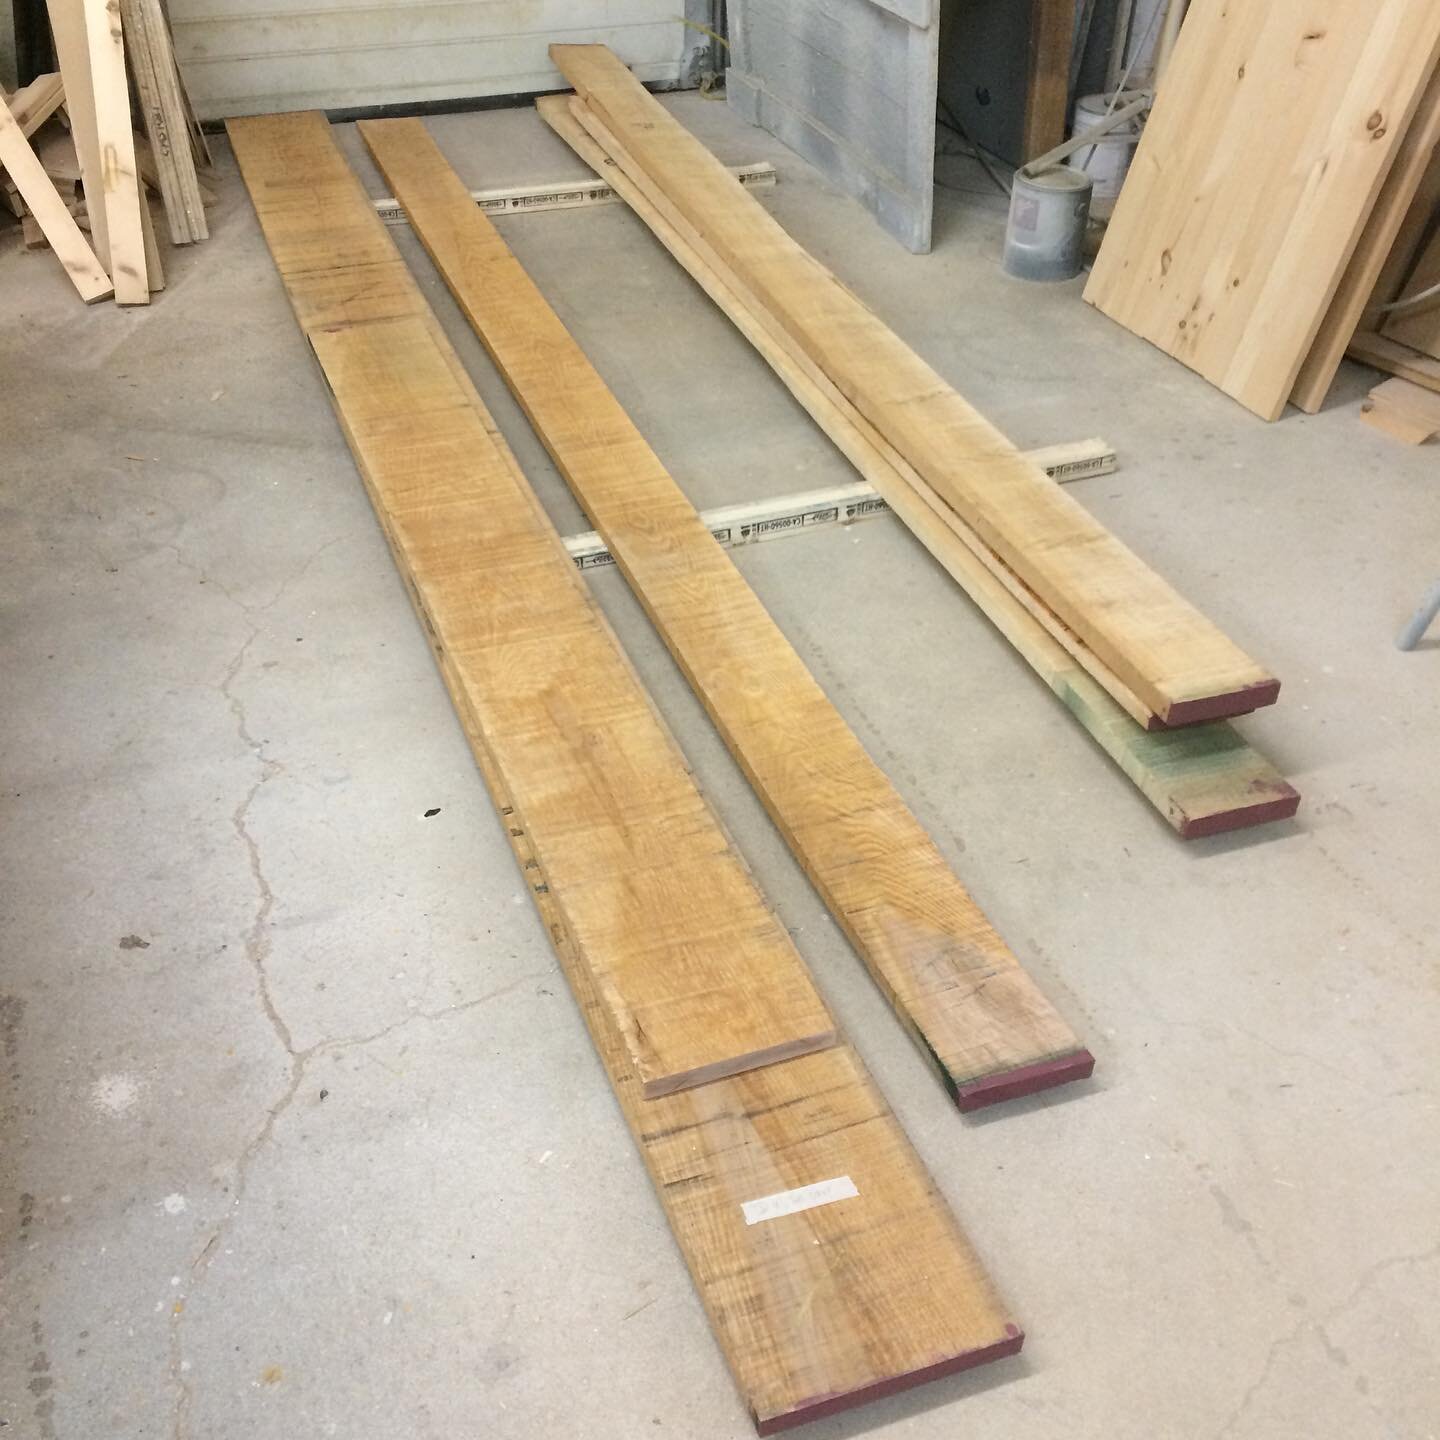 Woodworking: first you take the big boards and cut them into smaller ones. 🤪

New projects in the works.